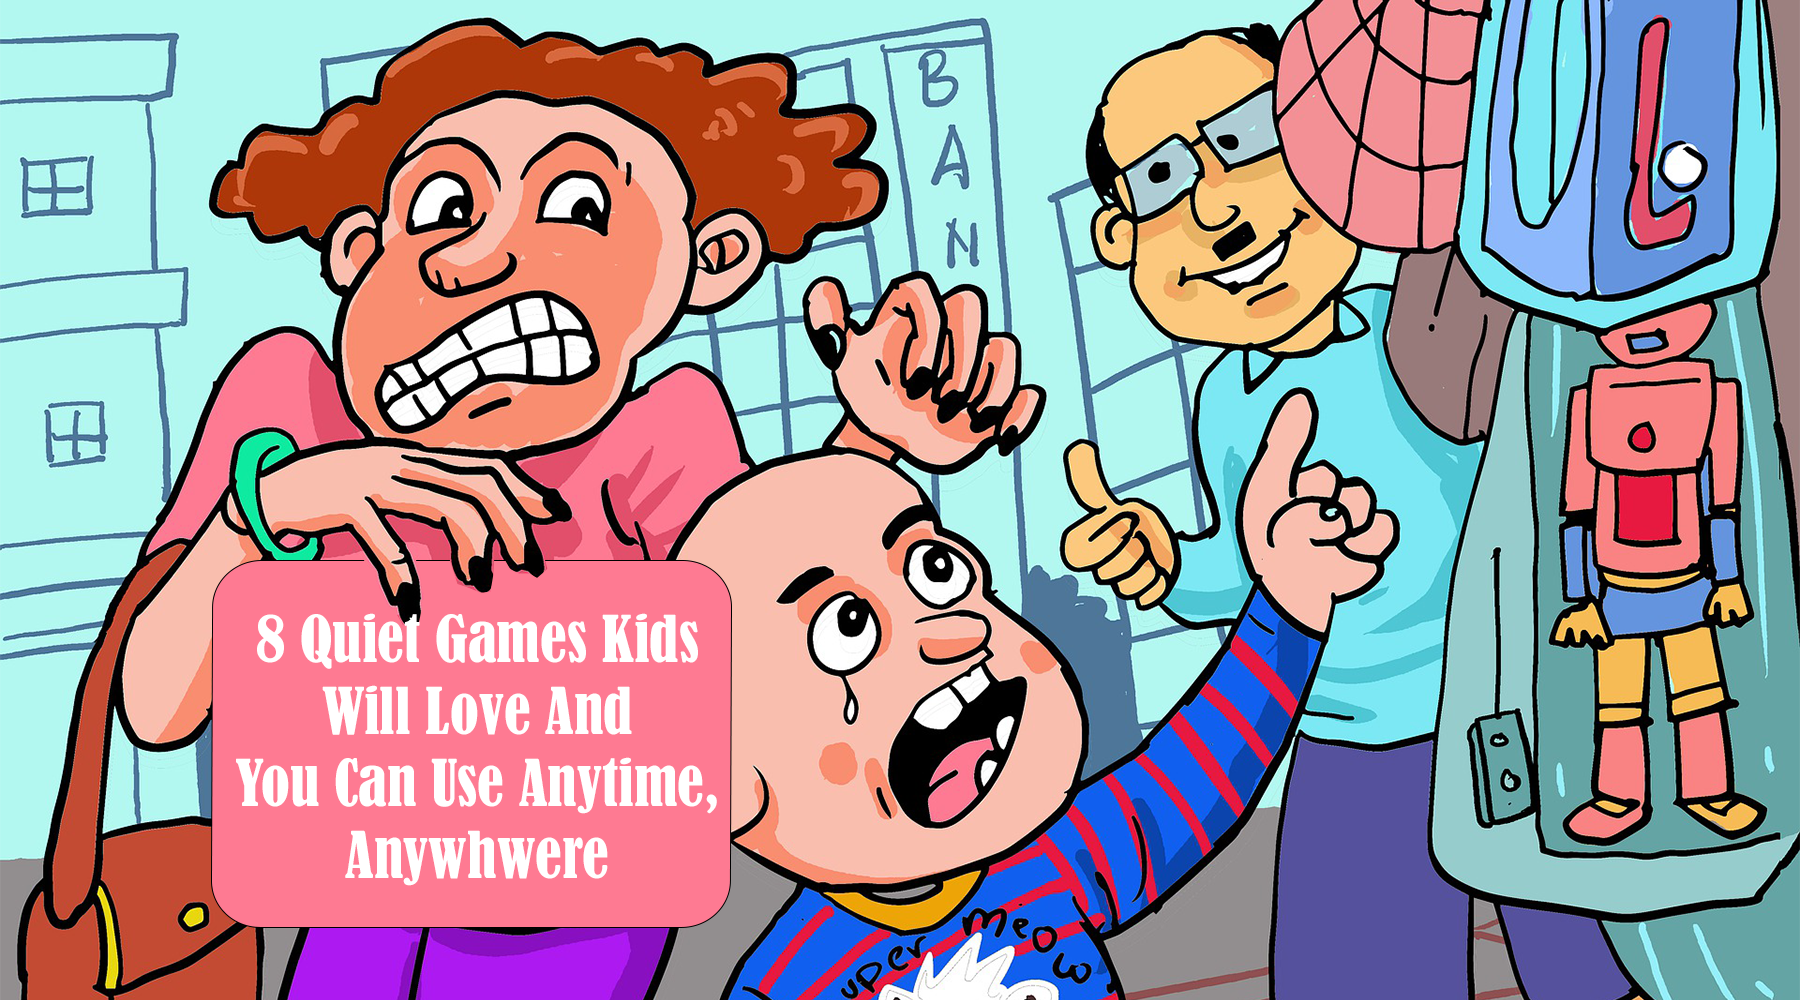 8 Quiet Games Kids Will Love And You Can Use Anytime, Anywhere